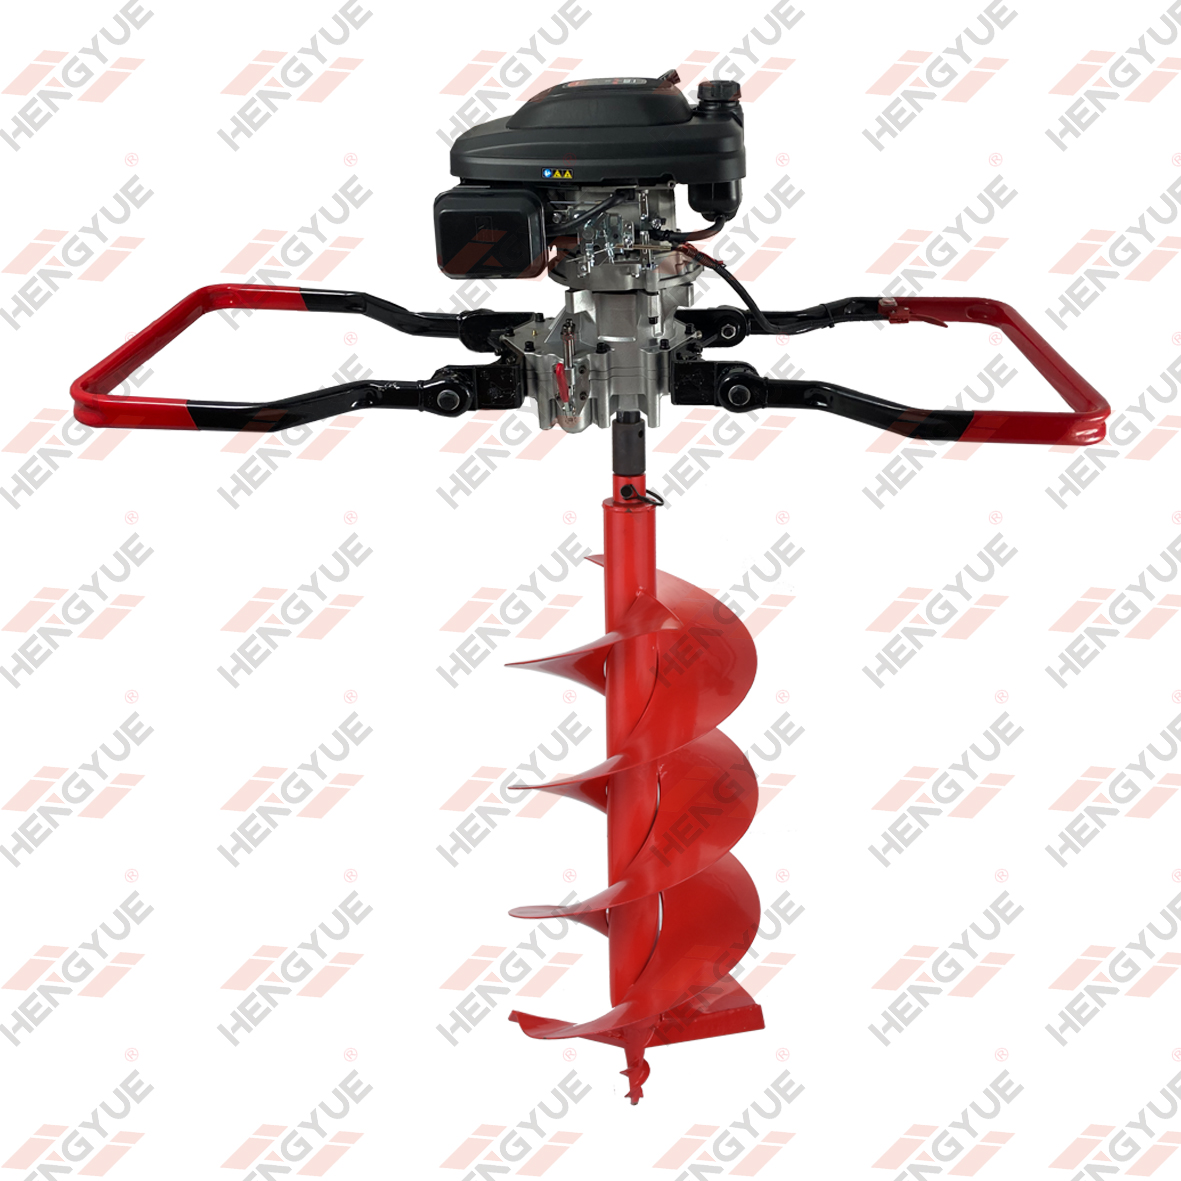 Powered by HONDA GXV160 ,Reverse Function Earth Auger Machine 